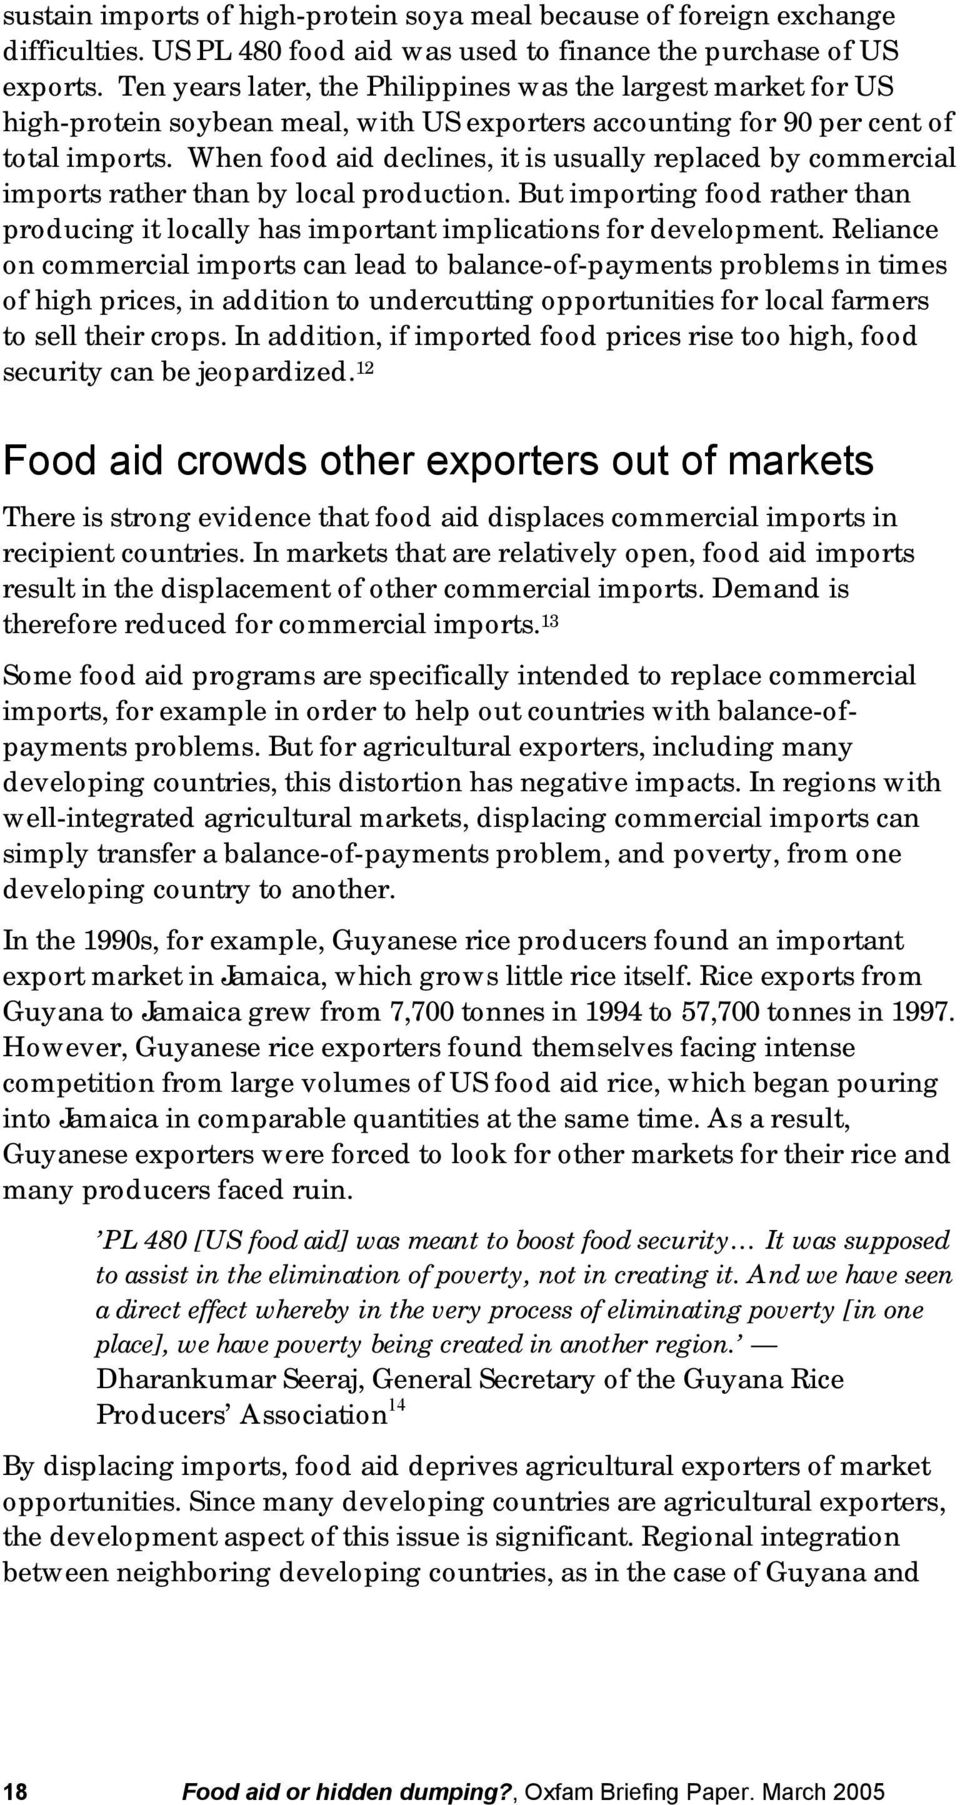 When food aid declines, it is usually replaced by commercial imports rather than by local production. But importing food rather than producing it locally has important implications for development.